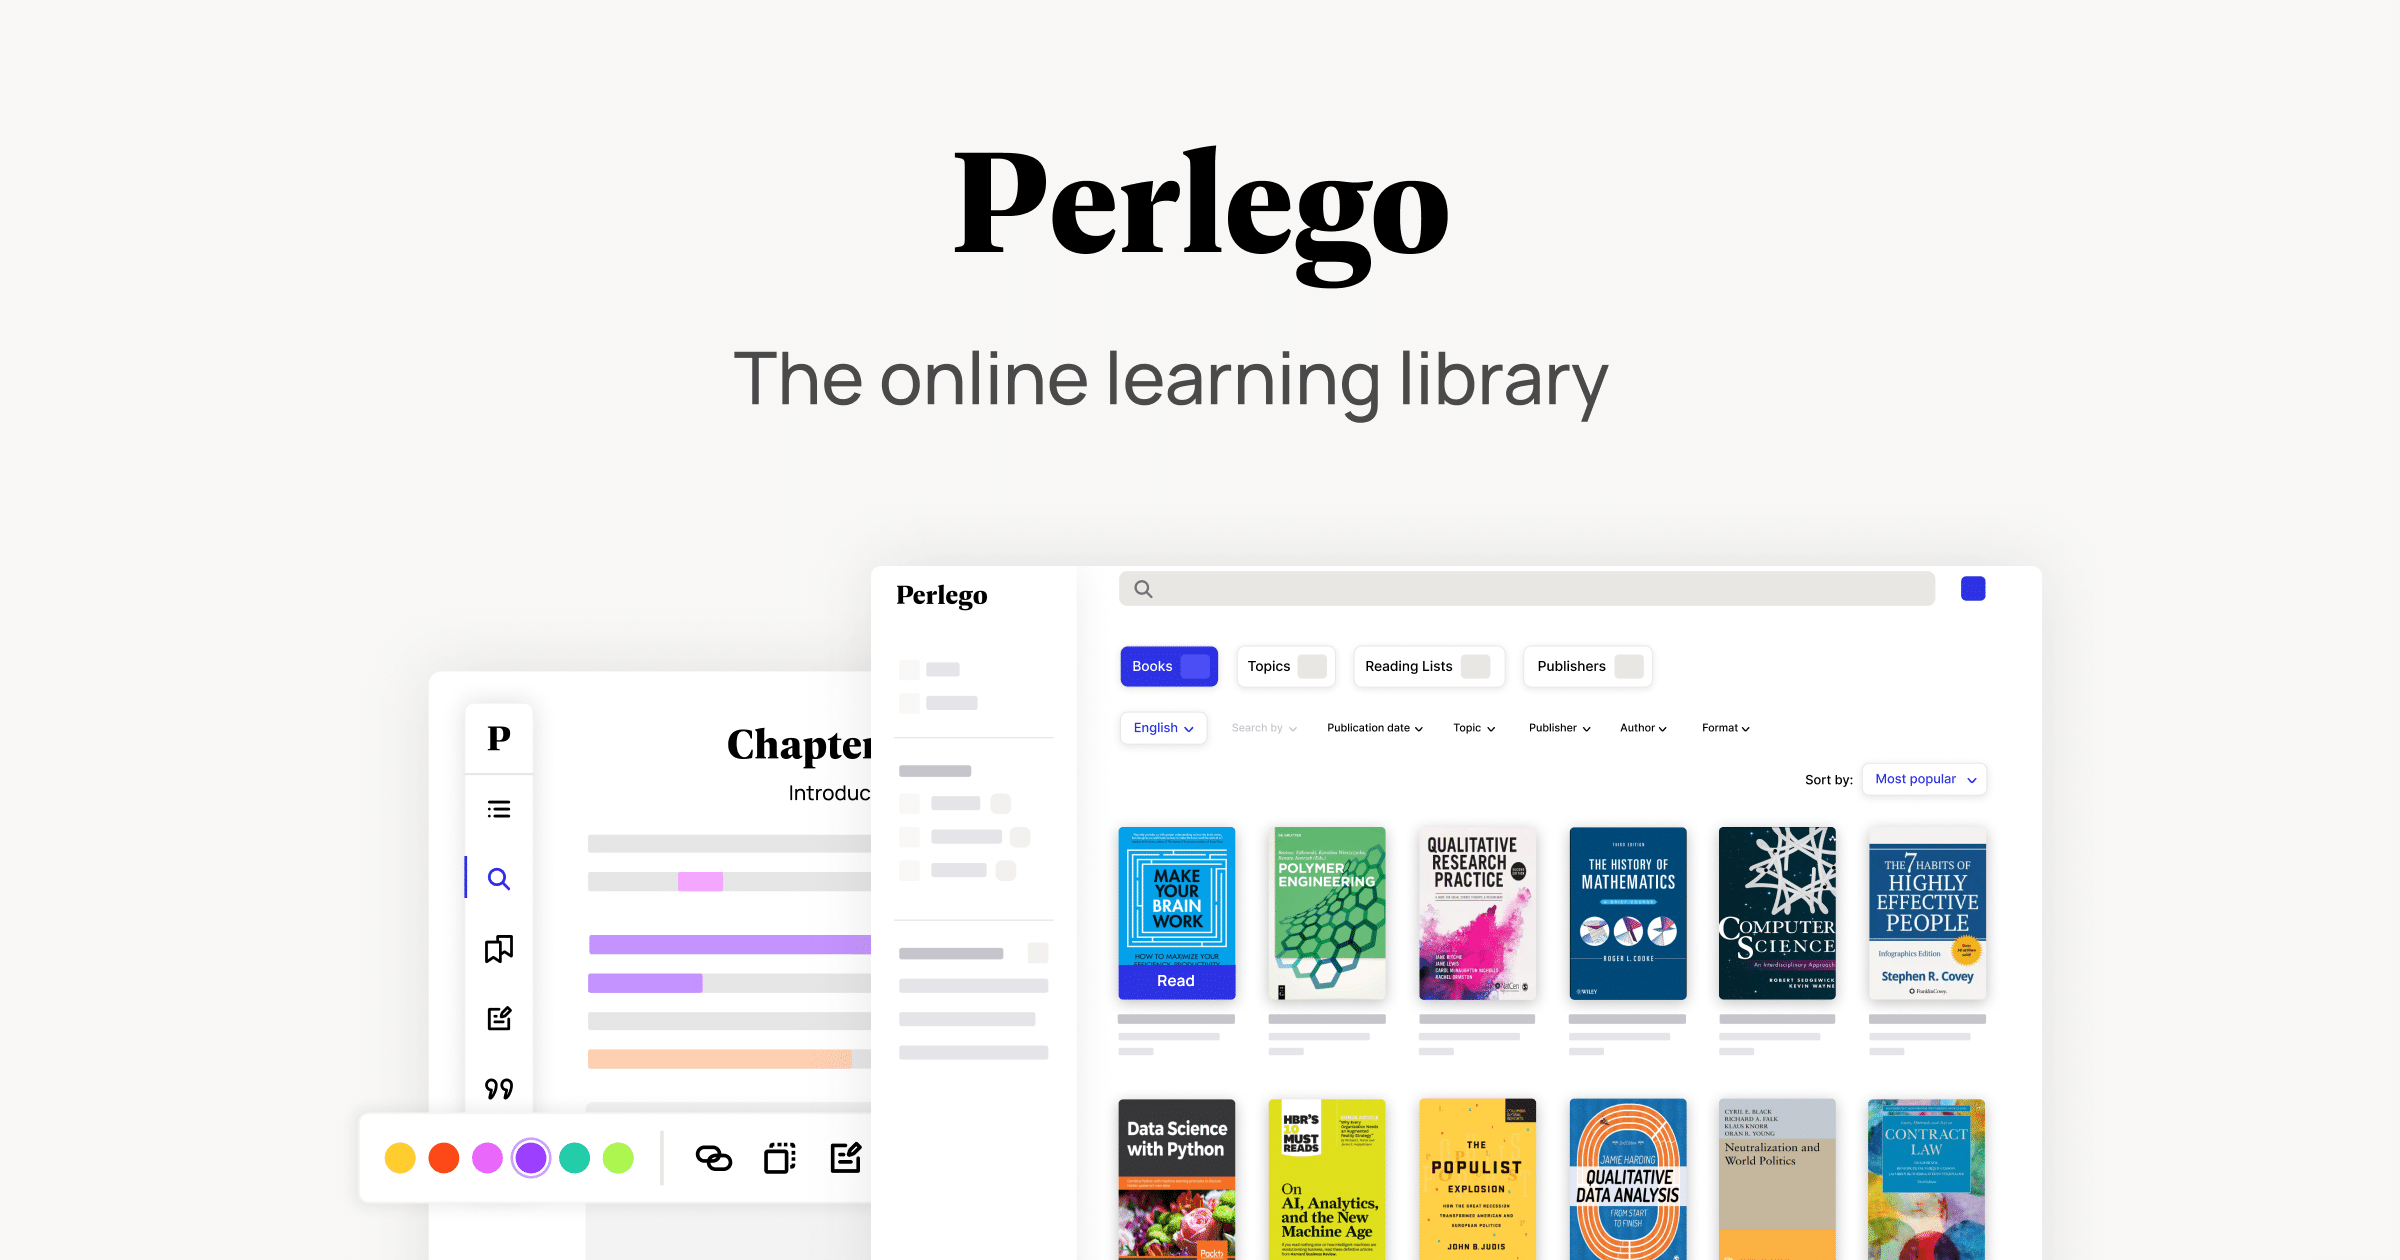 Perlego - Why every university student needs this ‘Netflix for textbooks’